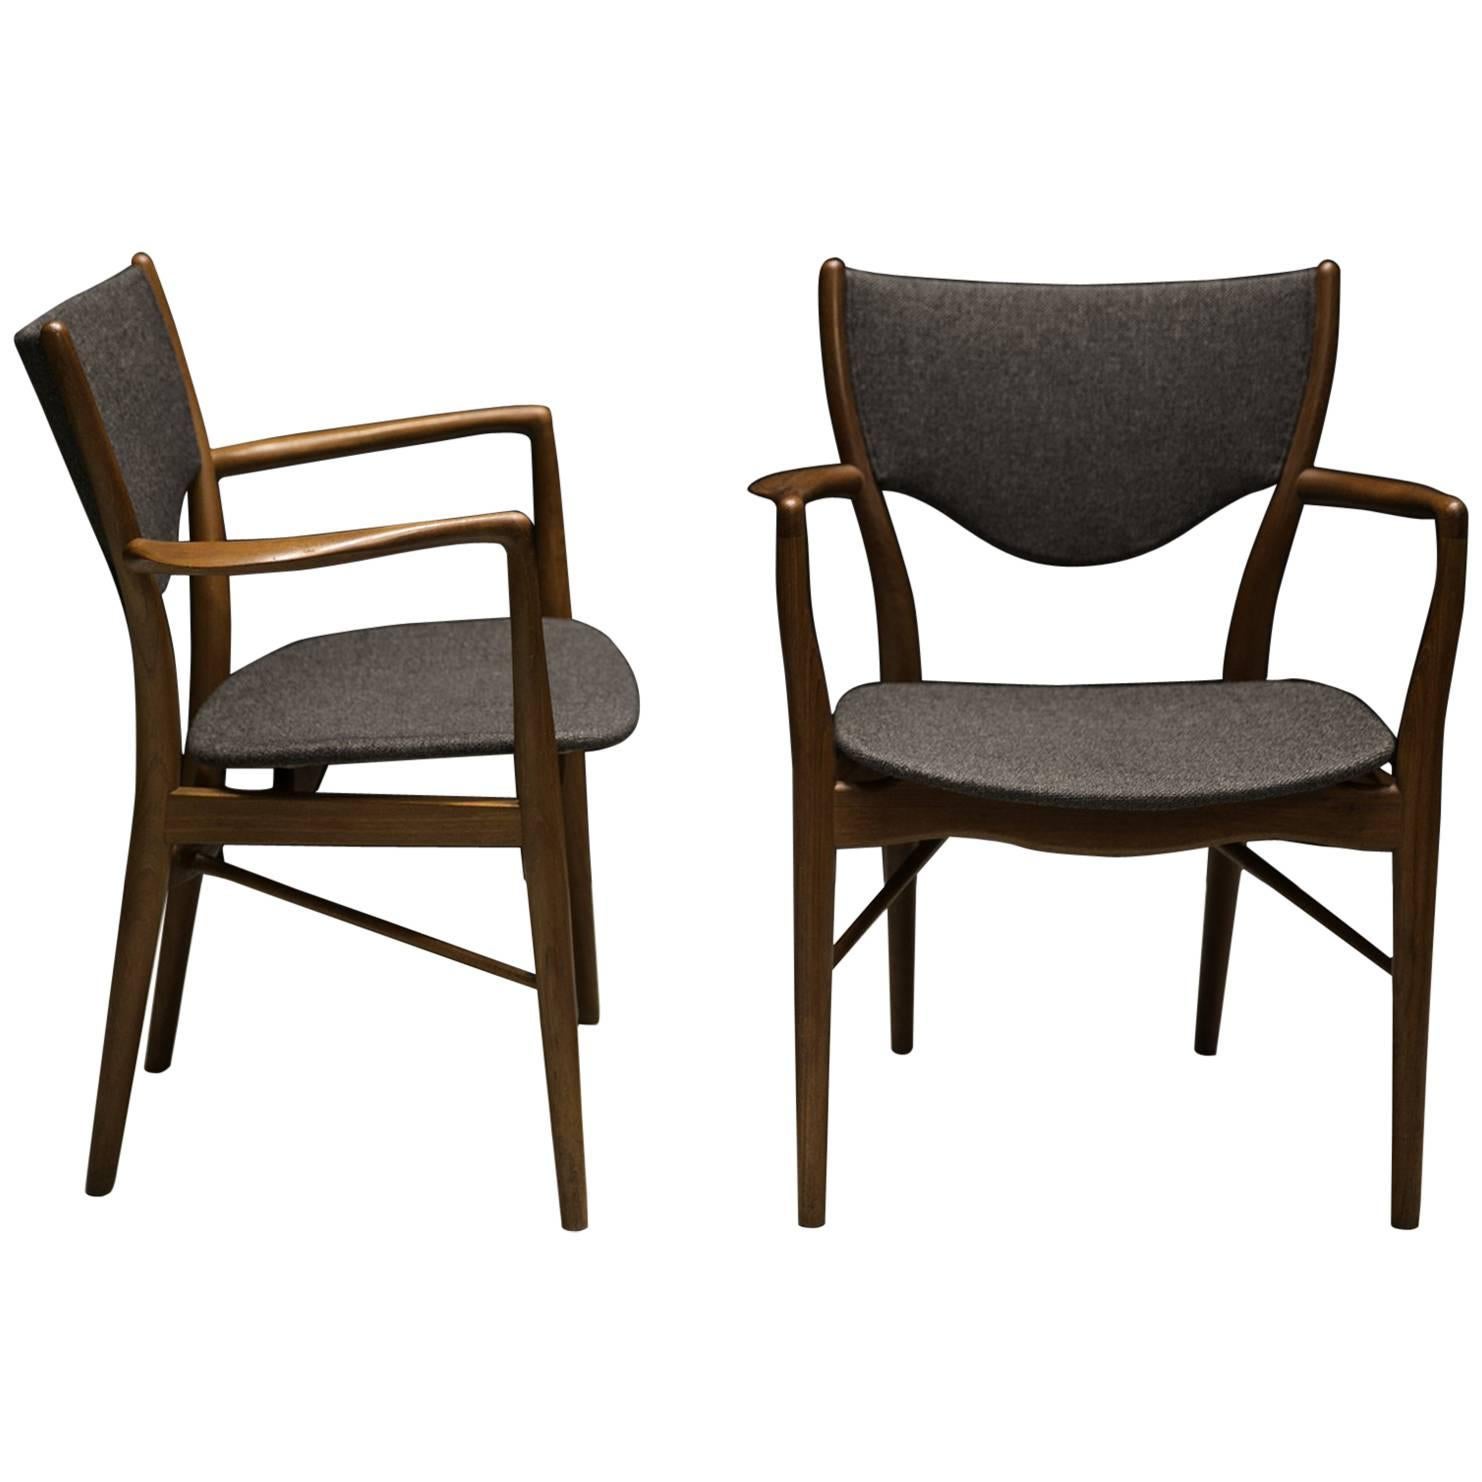 Pair of Finn Juhl BO-46 Chairs in Teak and Original Charcoal Wool Seats For Sale